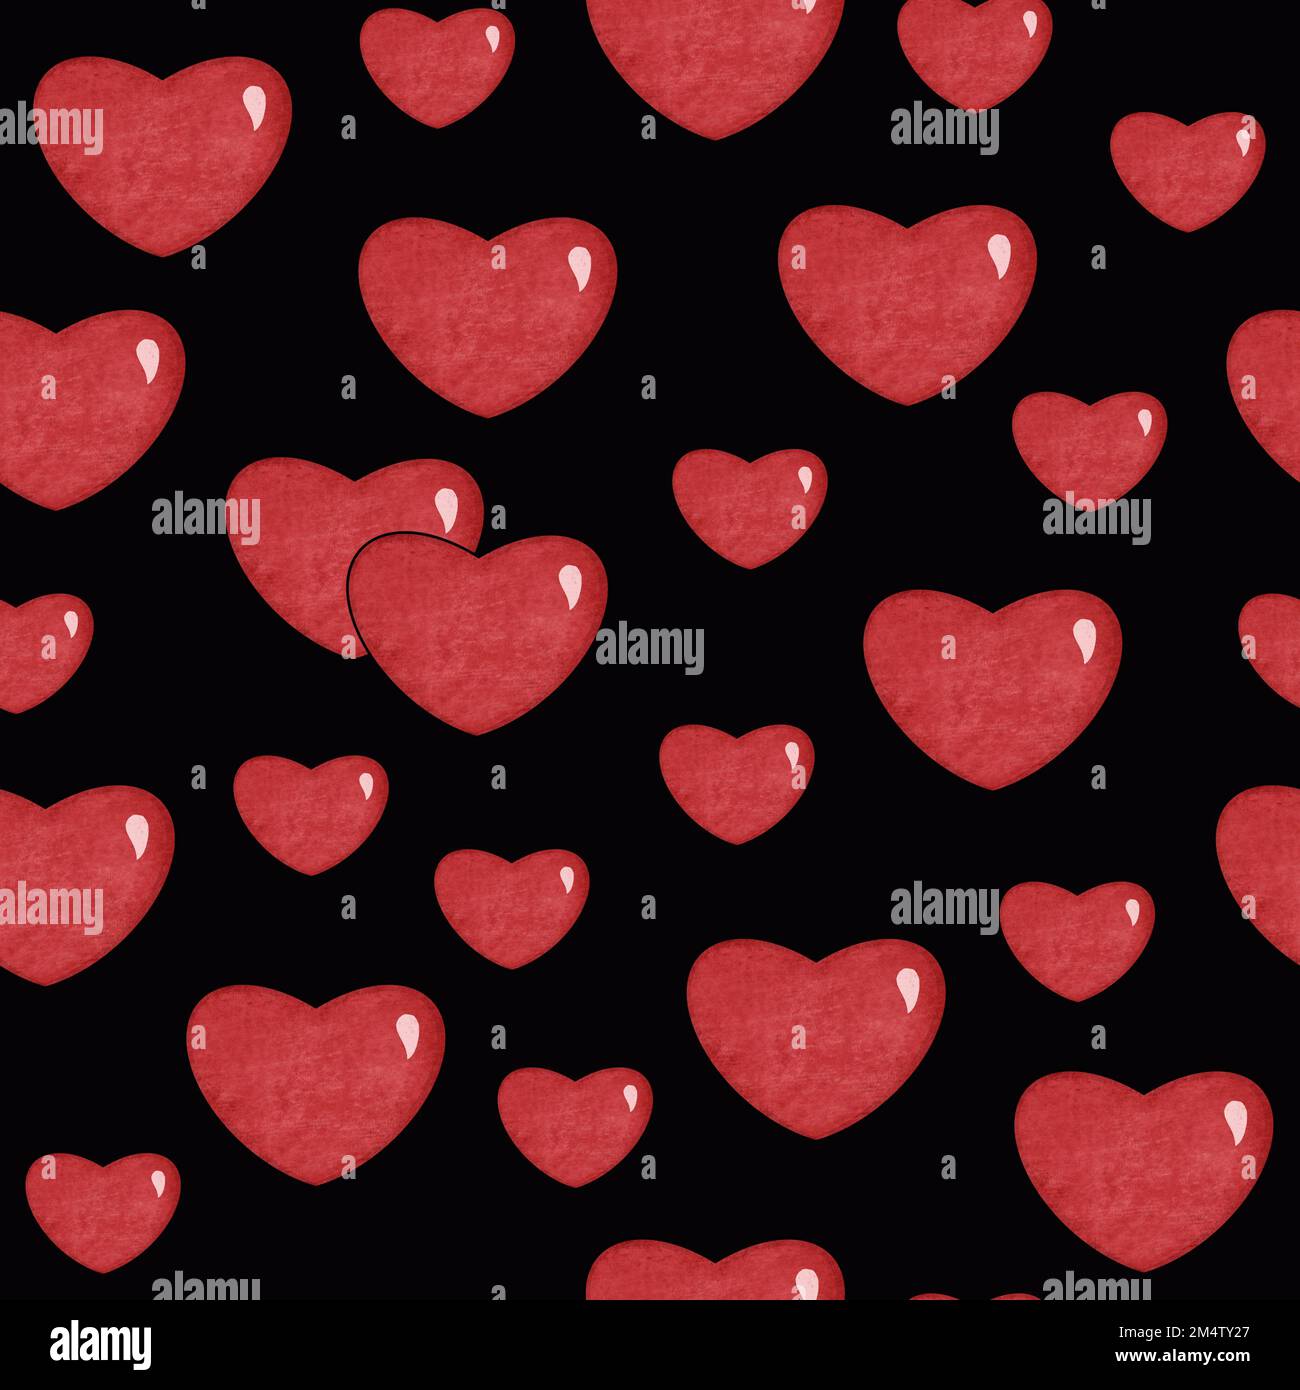 Seamless pattern of red hearts on a black background, minimalist